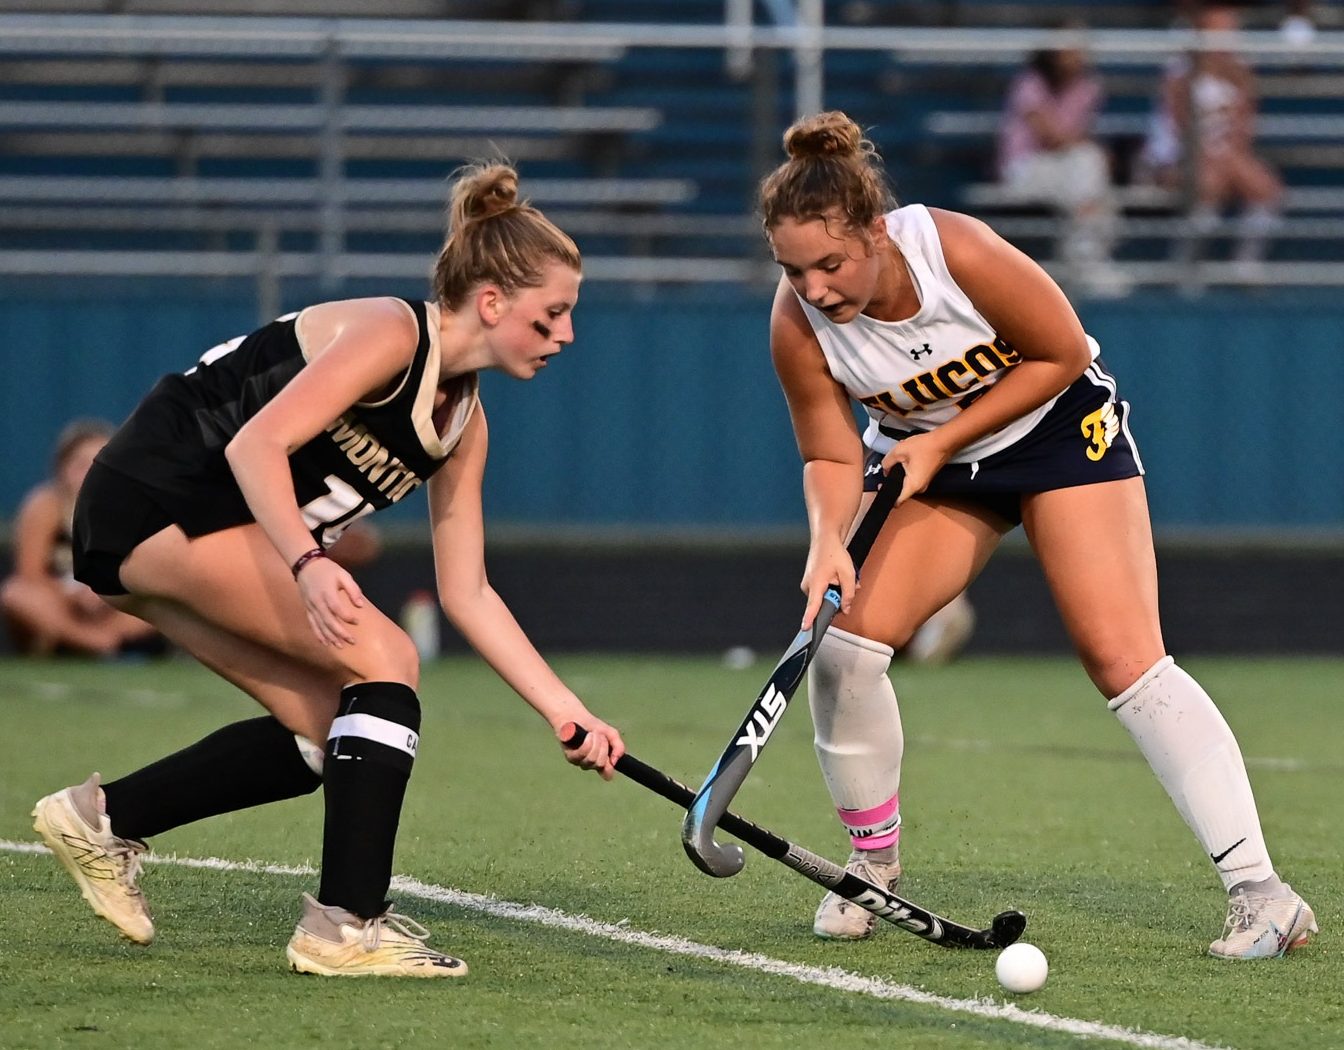 Senior Abigail Ford, #7, during a field hockey match against Monticello on Sept. 7.  Photo courtesy of Fluvanna Sports Photography.